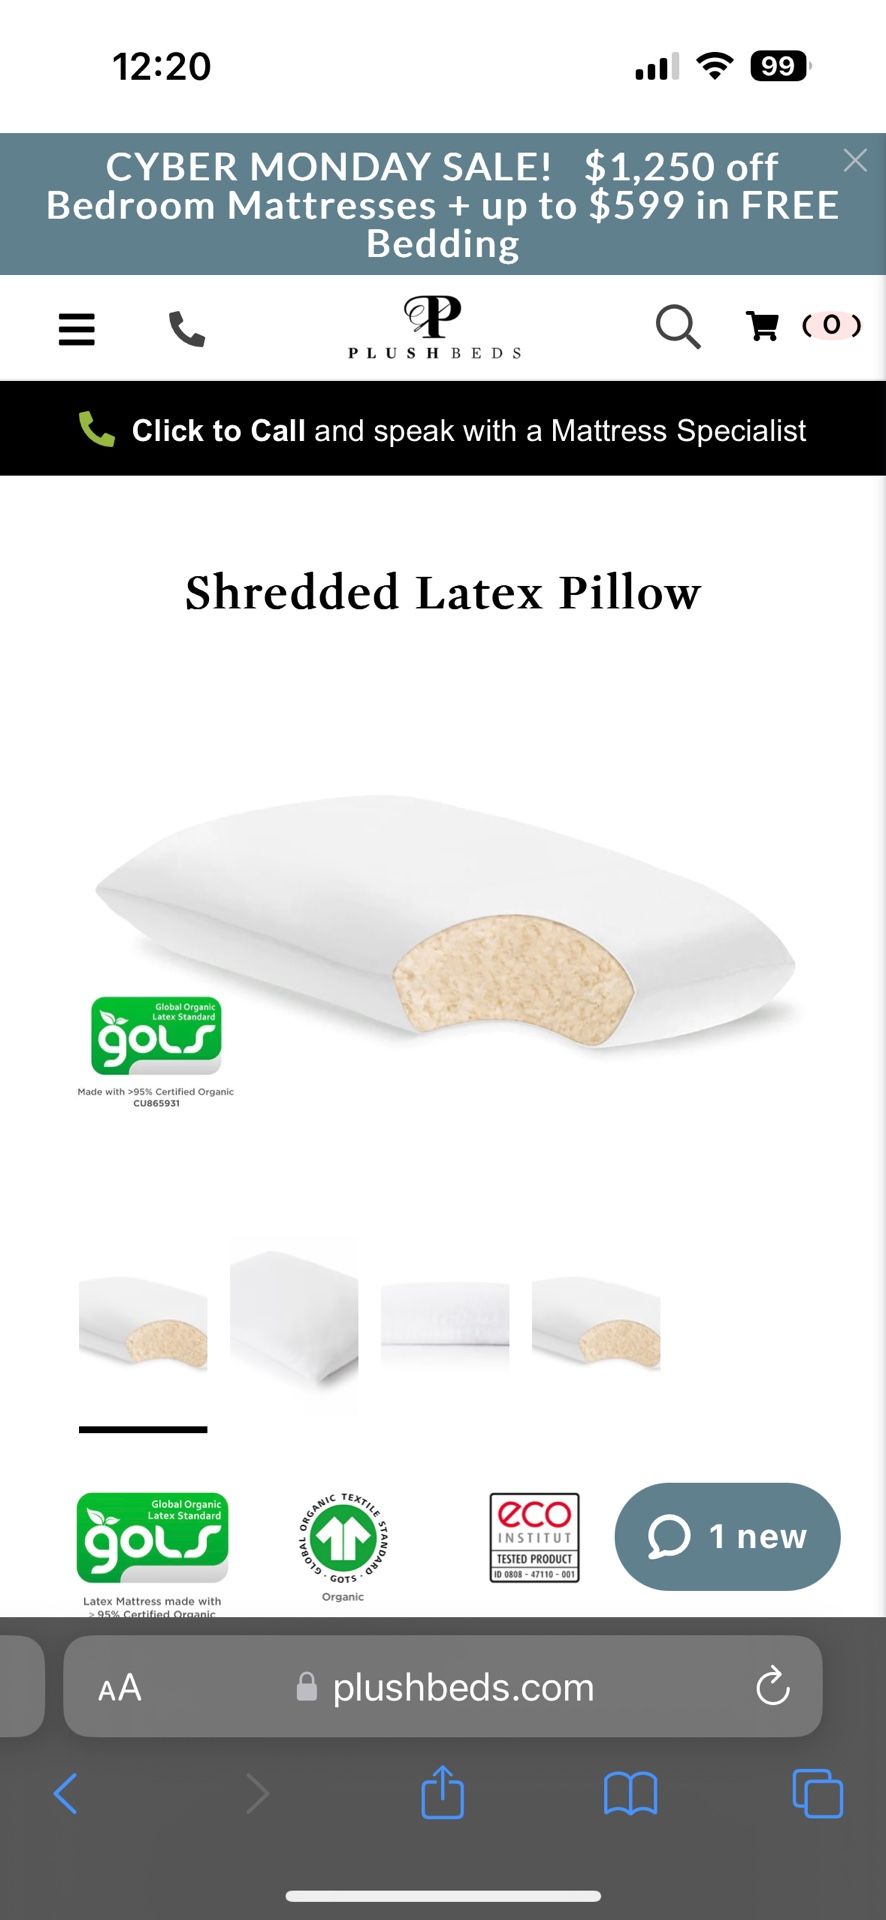 Plushbeds King Sized Shredded Latex Pillows - Springy Soft & Organic